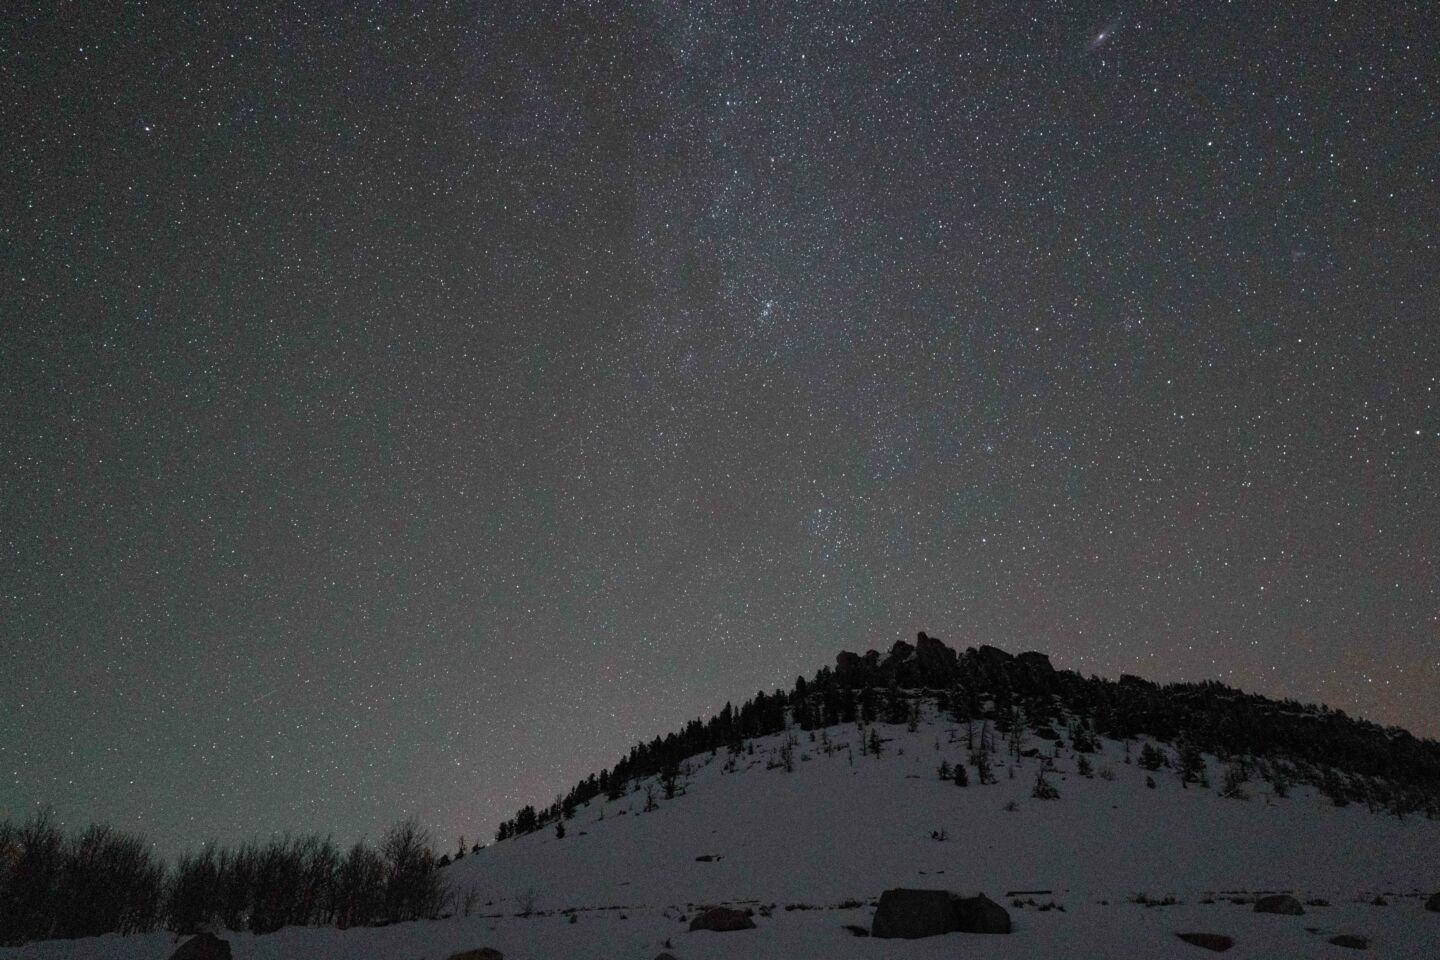 Starry sky over a snowy bluff.